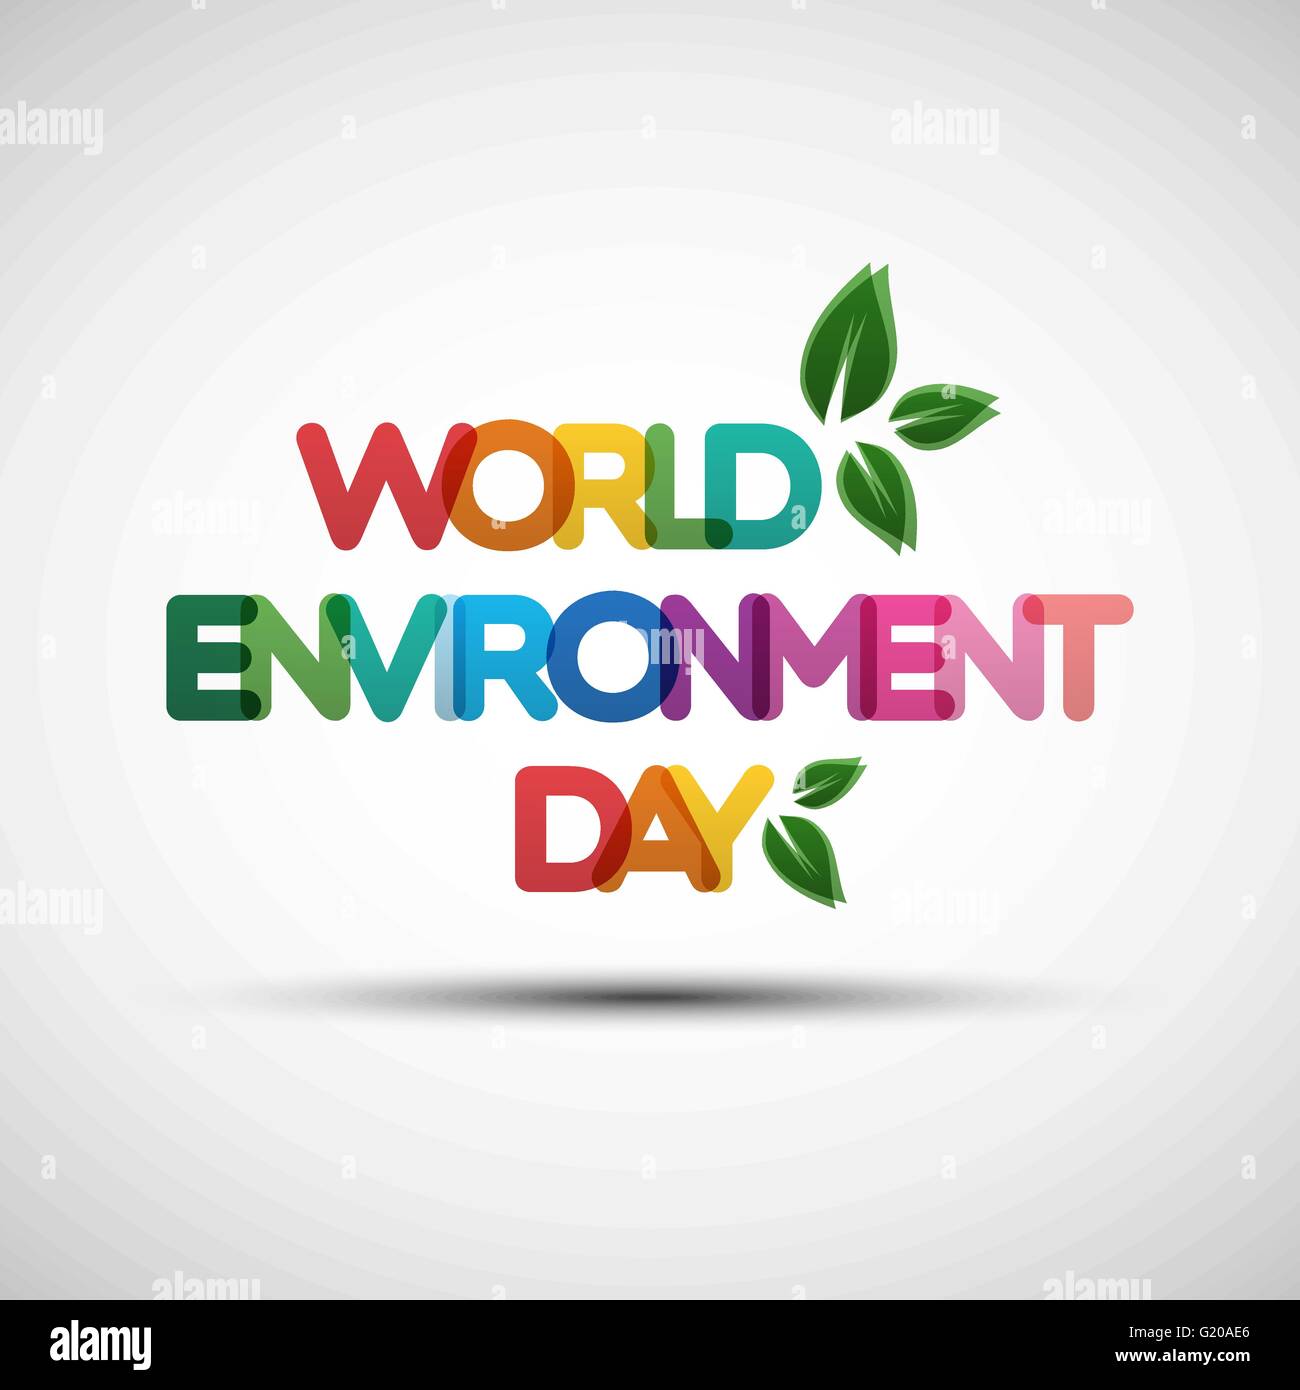 World environment day typography. Vector Illustration of World environment day card with creative multicolored transparent text Stock Vector